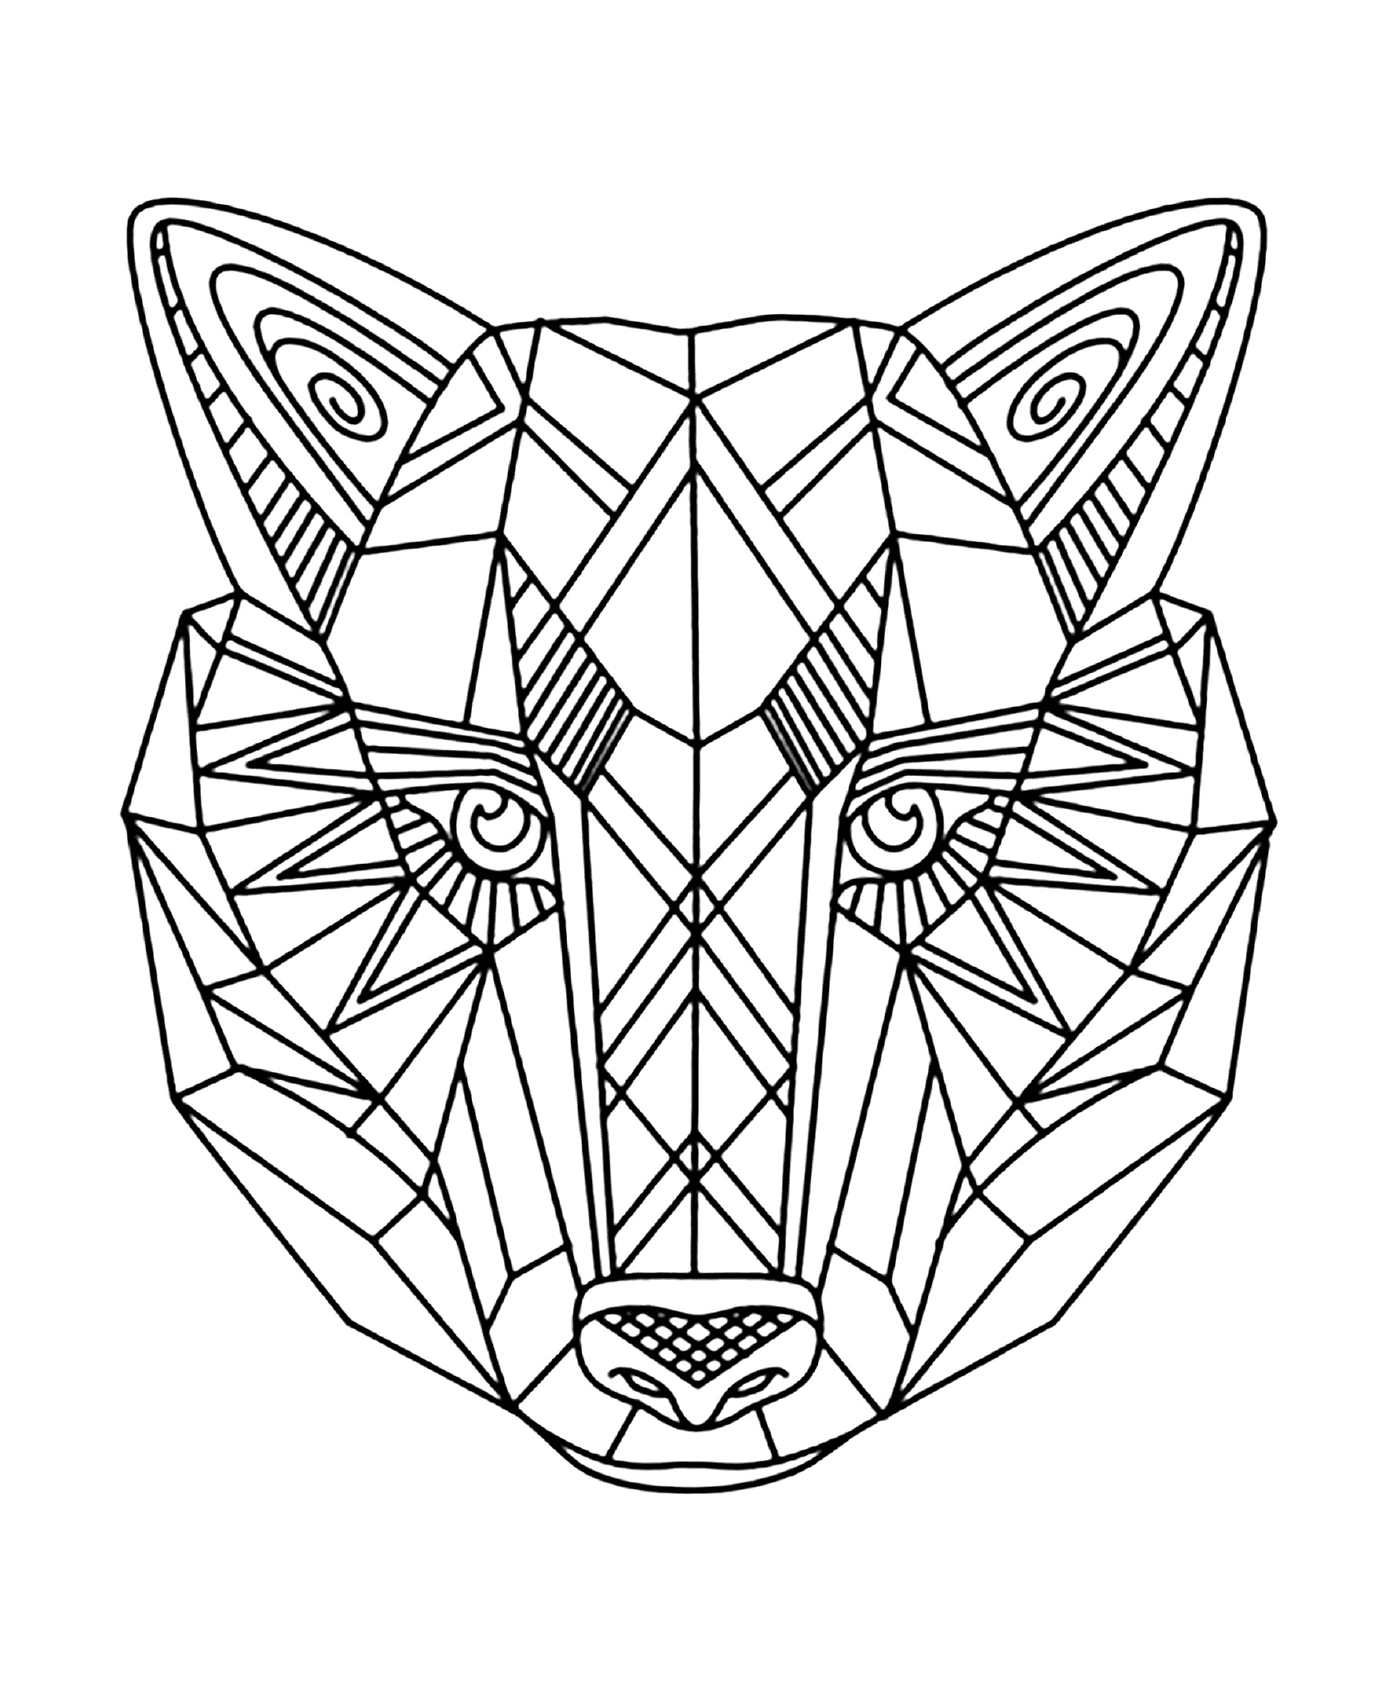  Animal with a geometric pattern on the face 